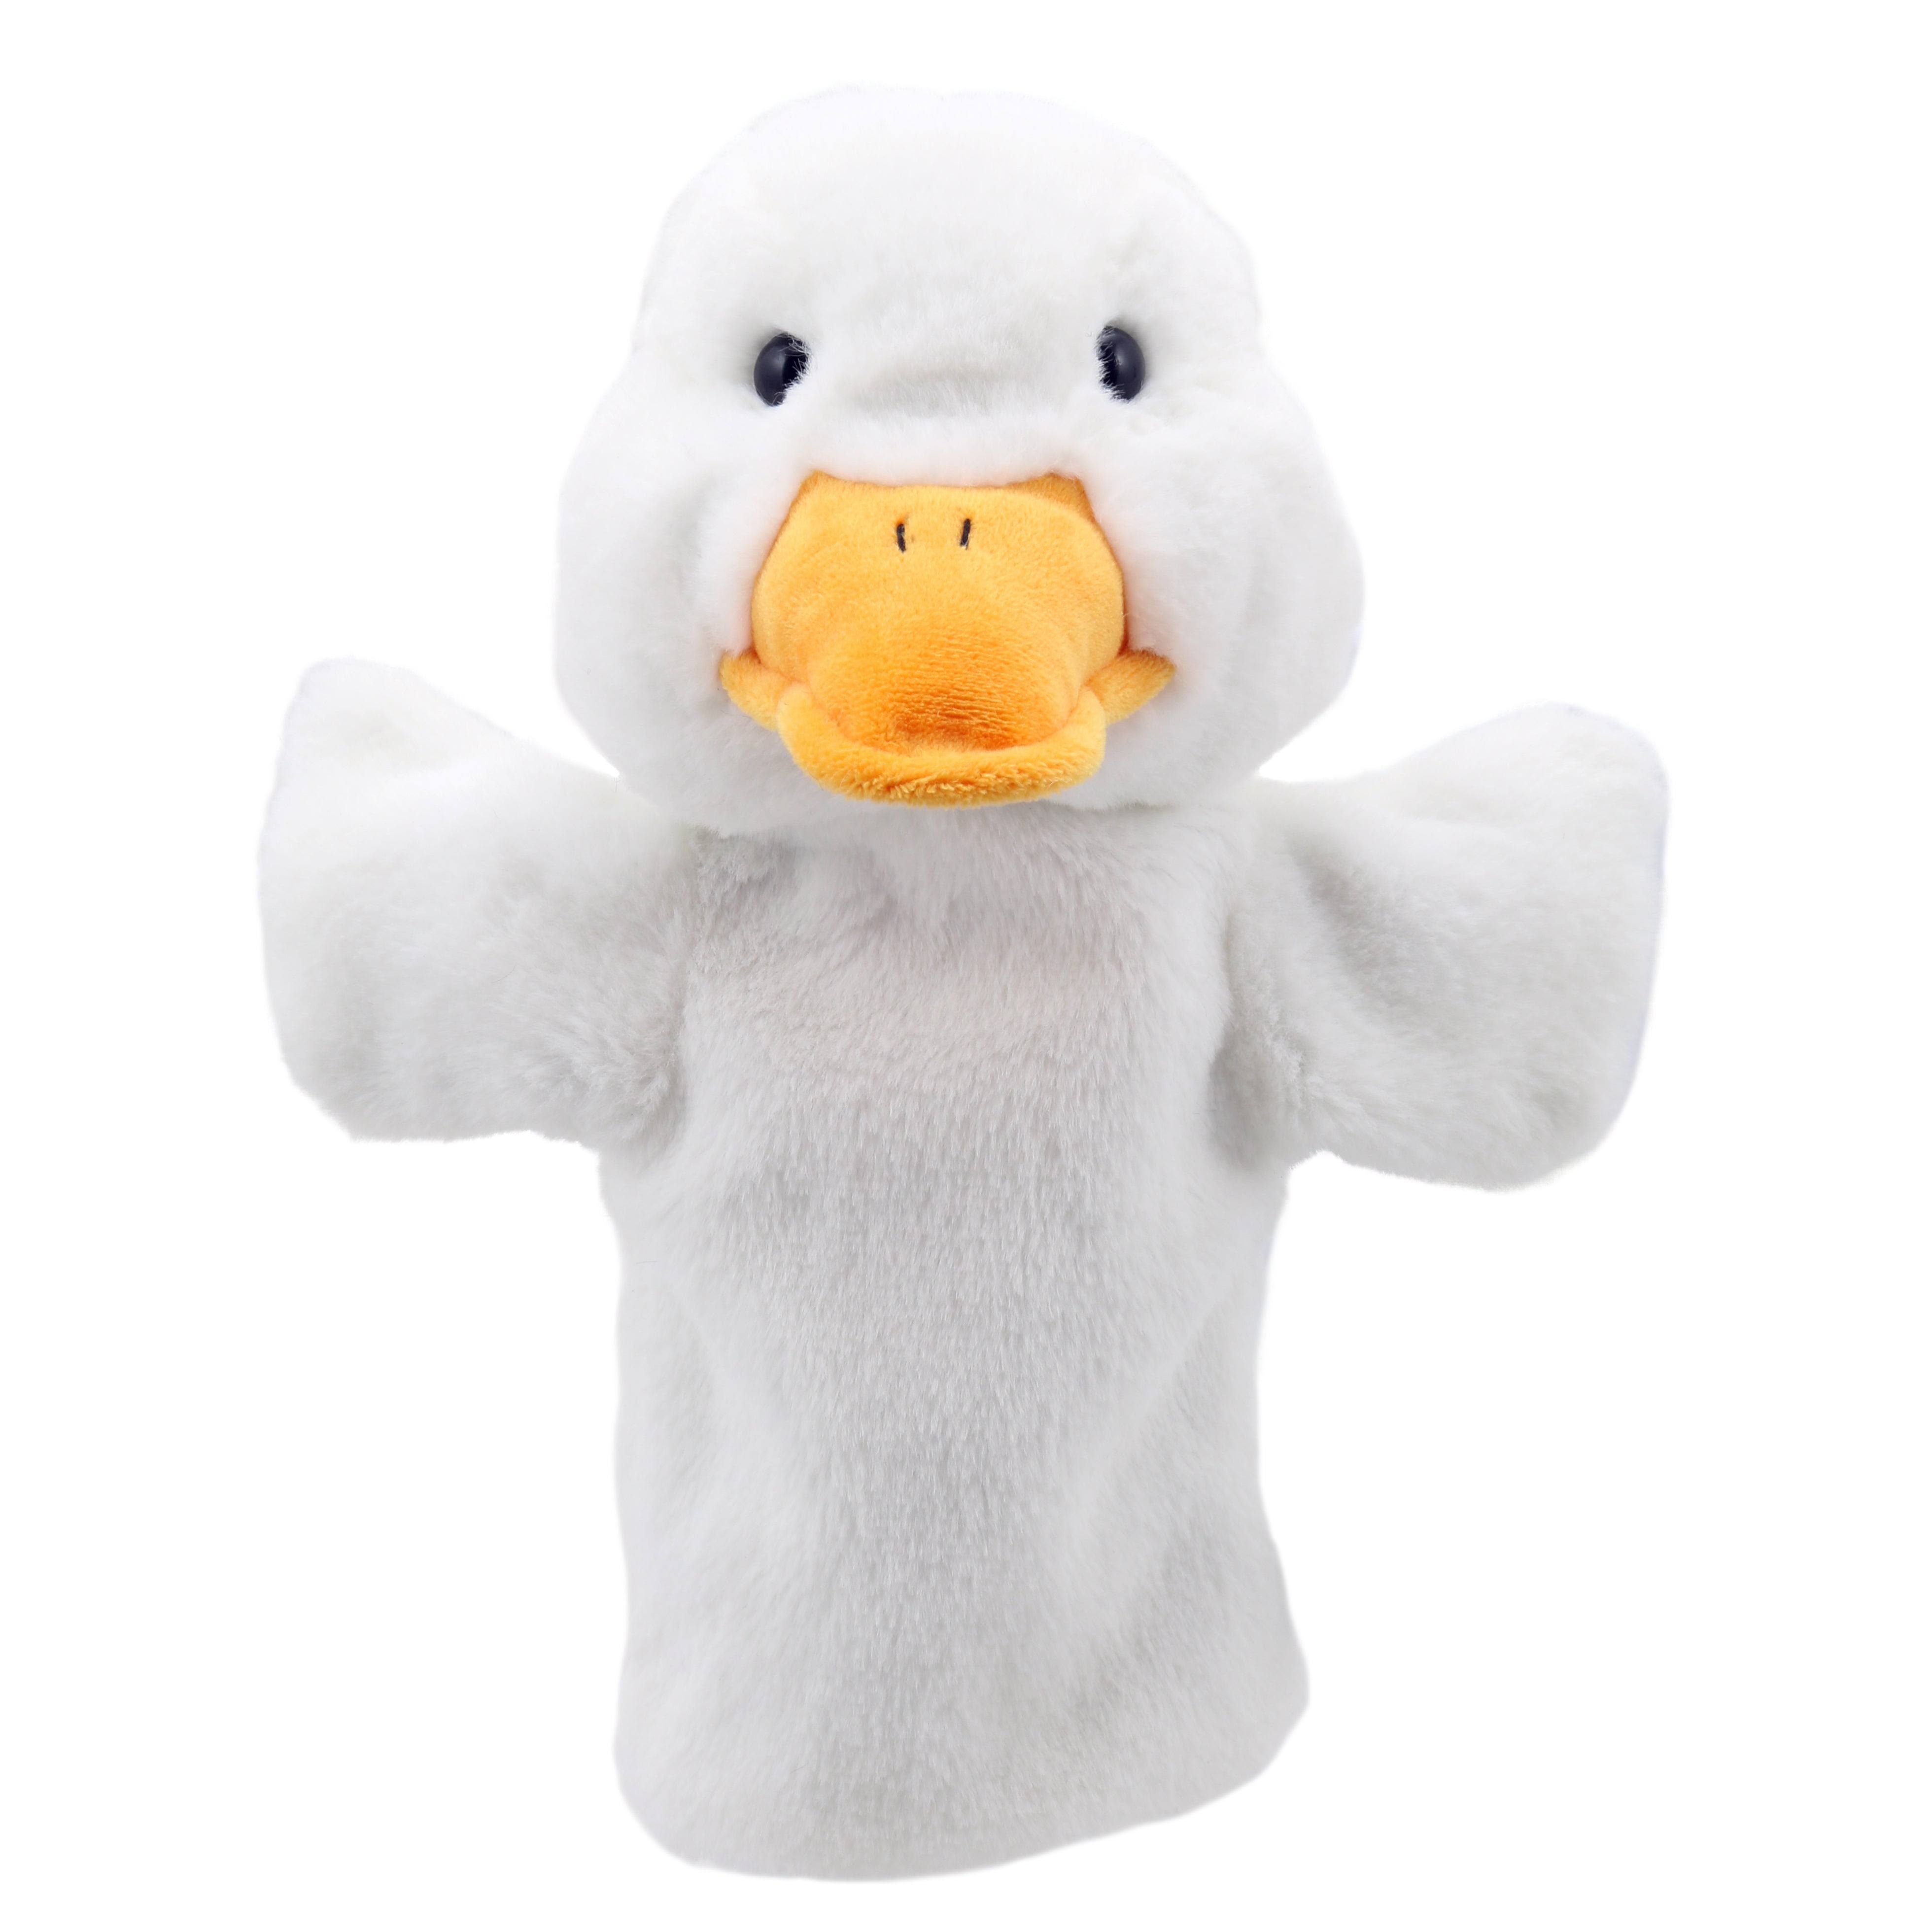 The Puppet Company - Duck - Puppet Buddies - Animal Hand Puppet